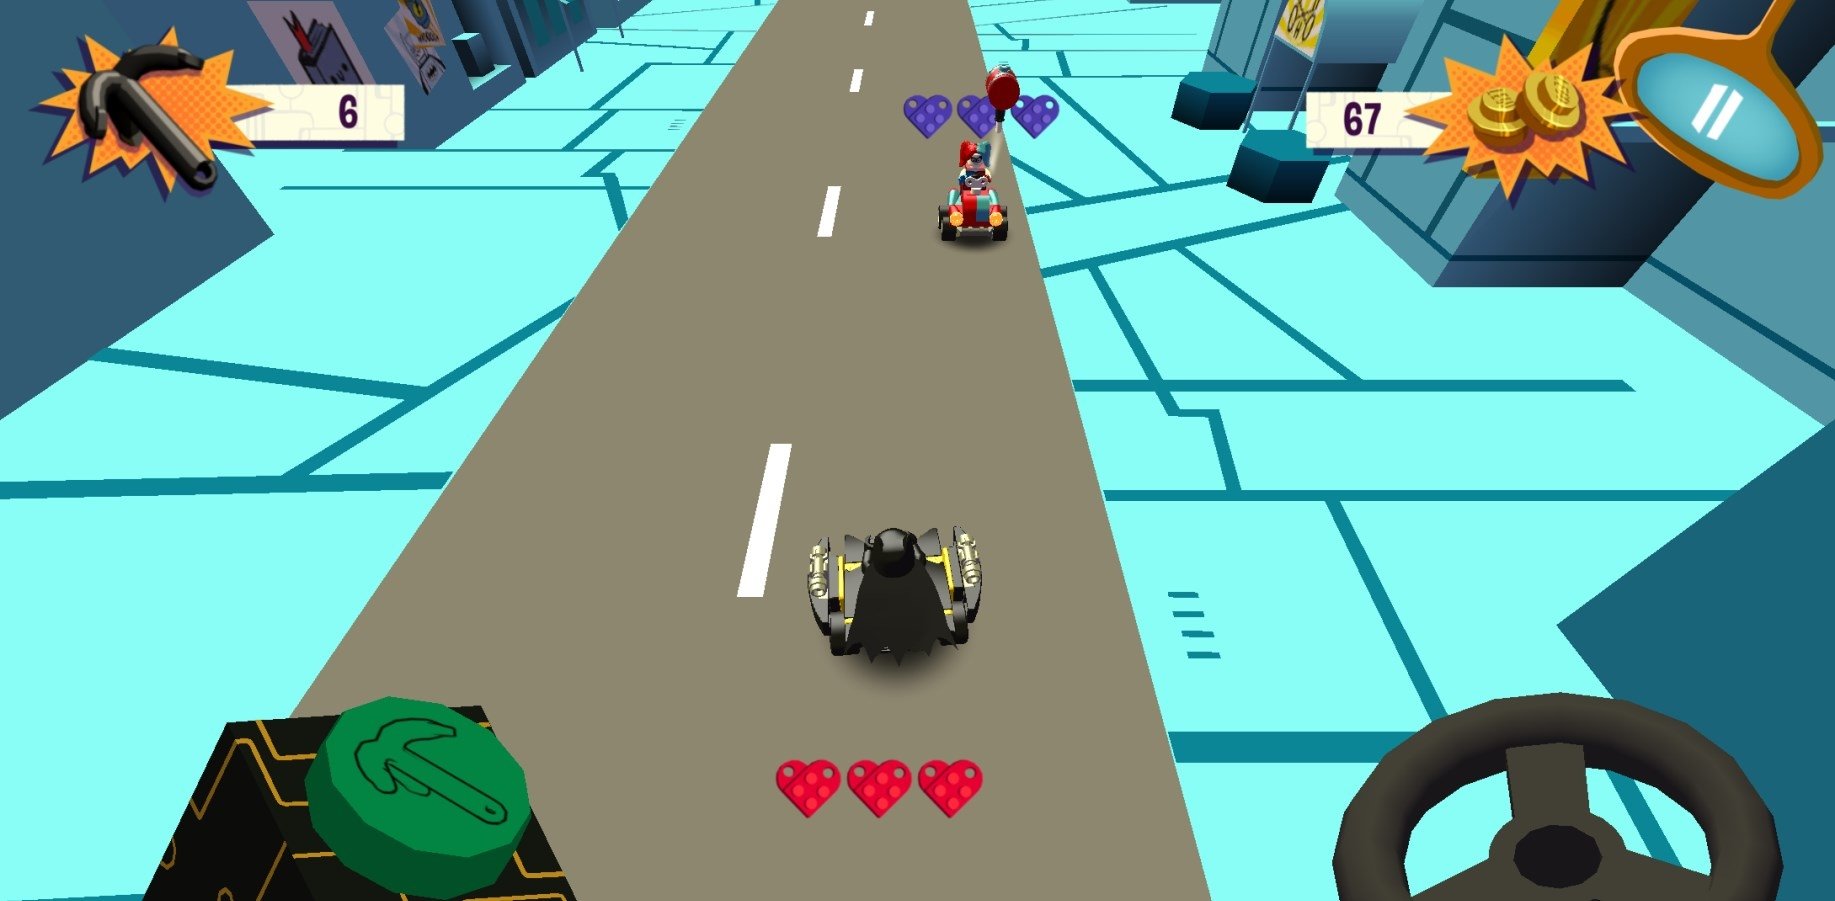 lego batman dc super heroes free download for android apk